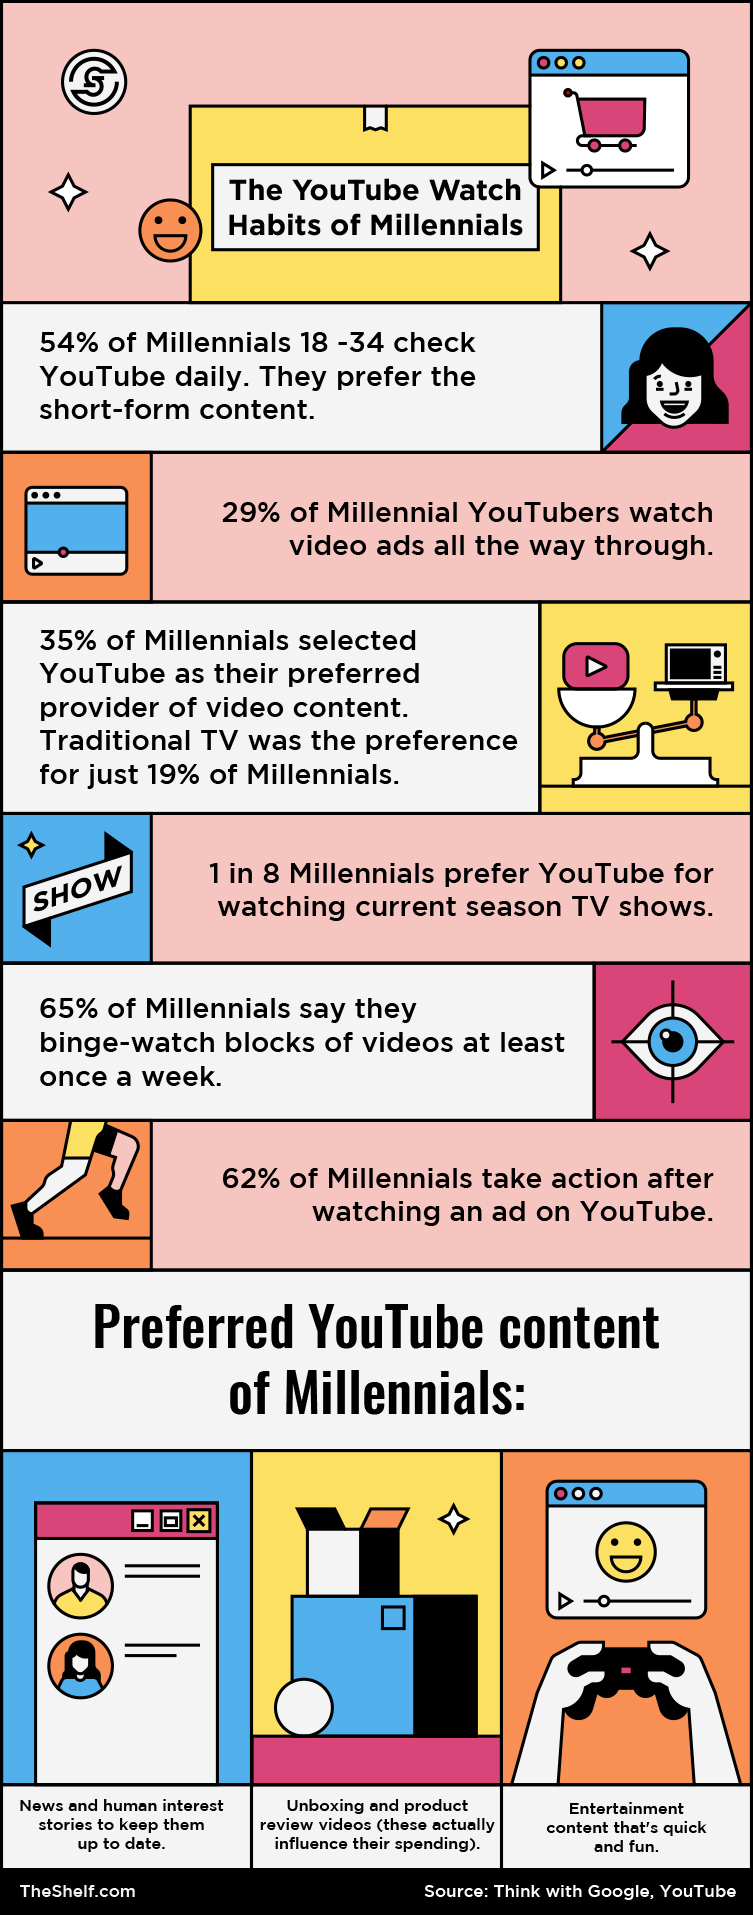  Infographic image on YouTube watch habits of Millennials. 